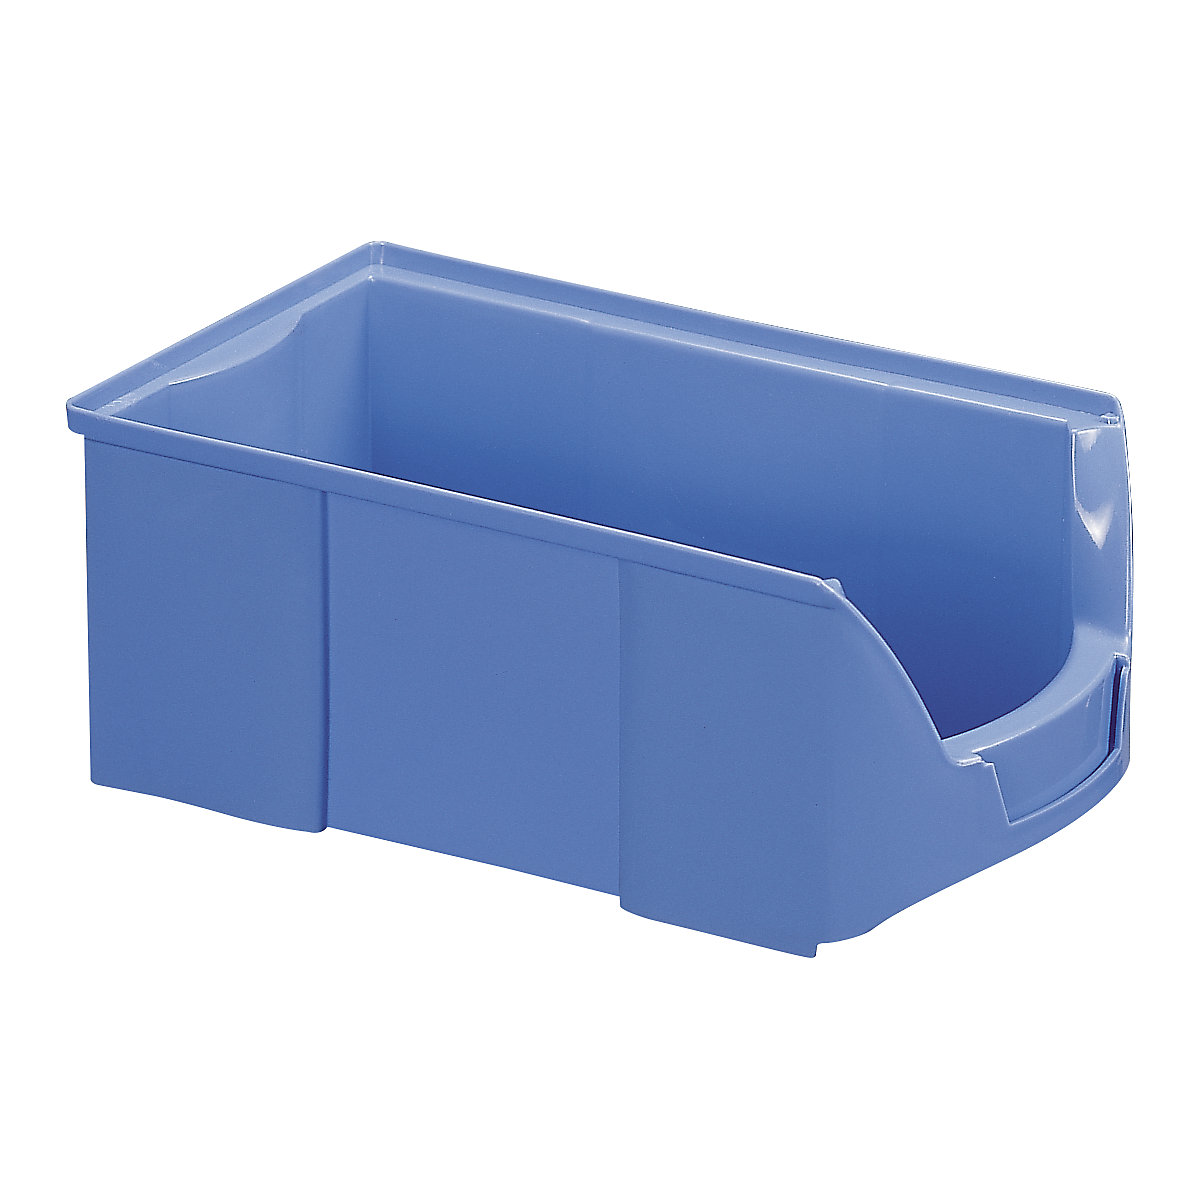 FUTURA open fronted storage bin made of polyethylene, LxWxH 510 x 310 x 201 mm, pack of 6, green-16